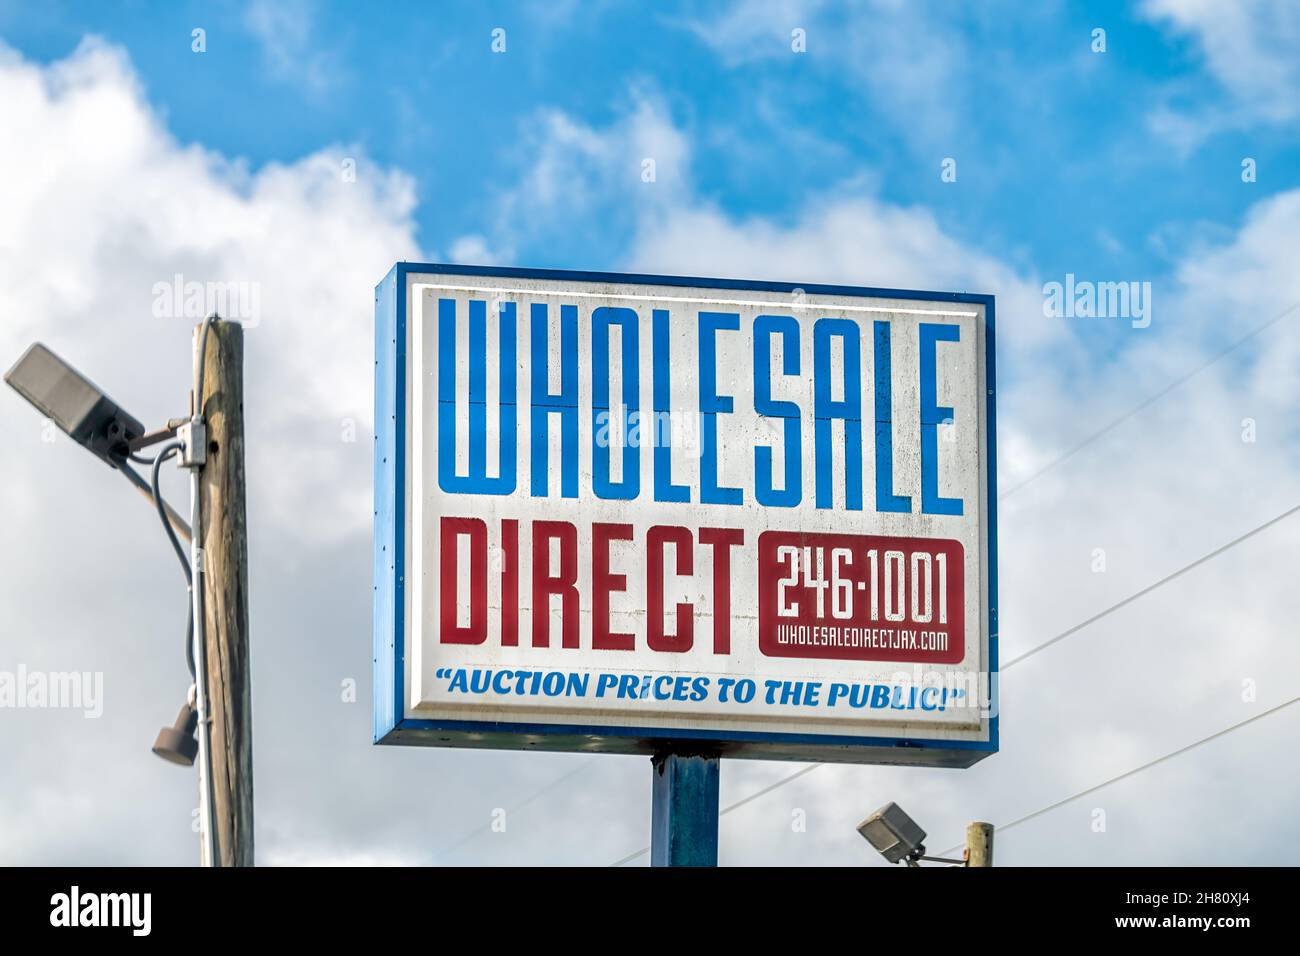 Jacksonville, USA - July 8, 2021: Sign advertisement billboard on street road for Wholesale direct auction prices to public of used cars vehicles with Stock Photo